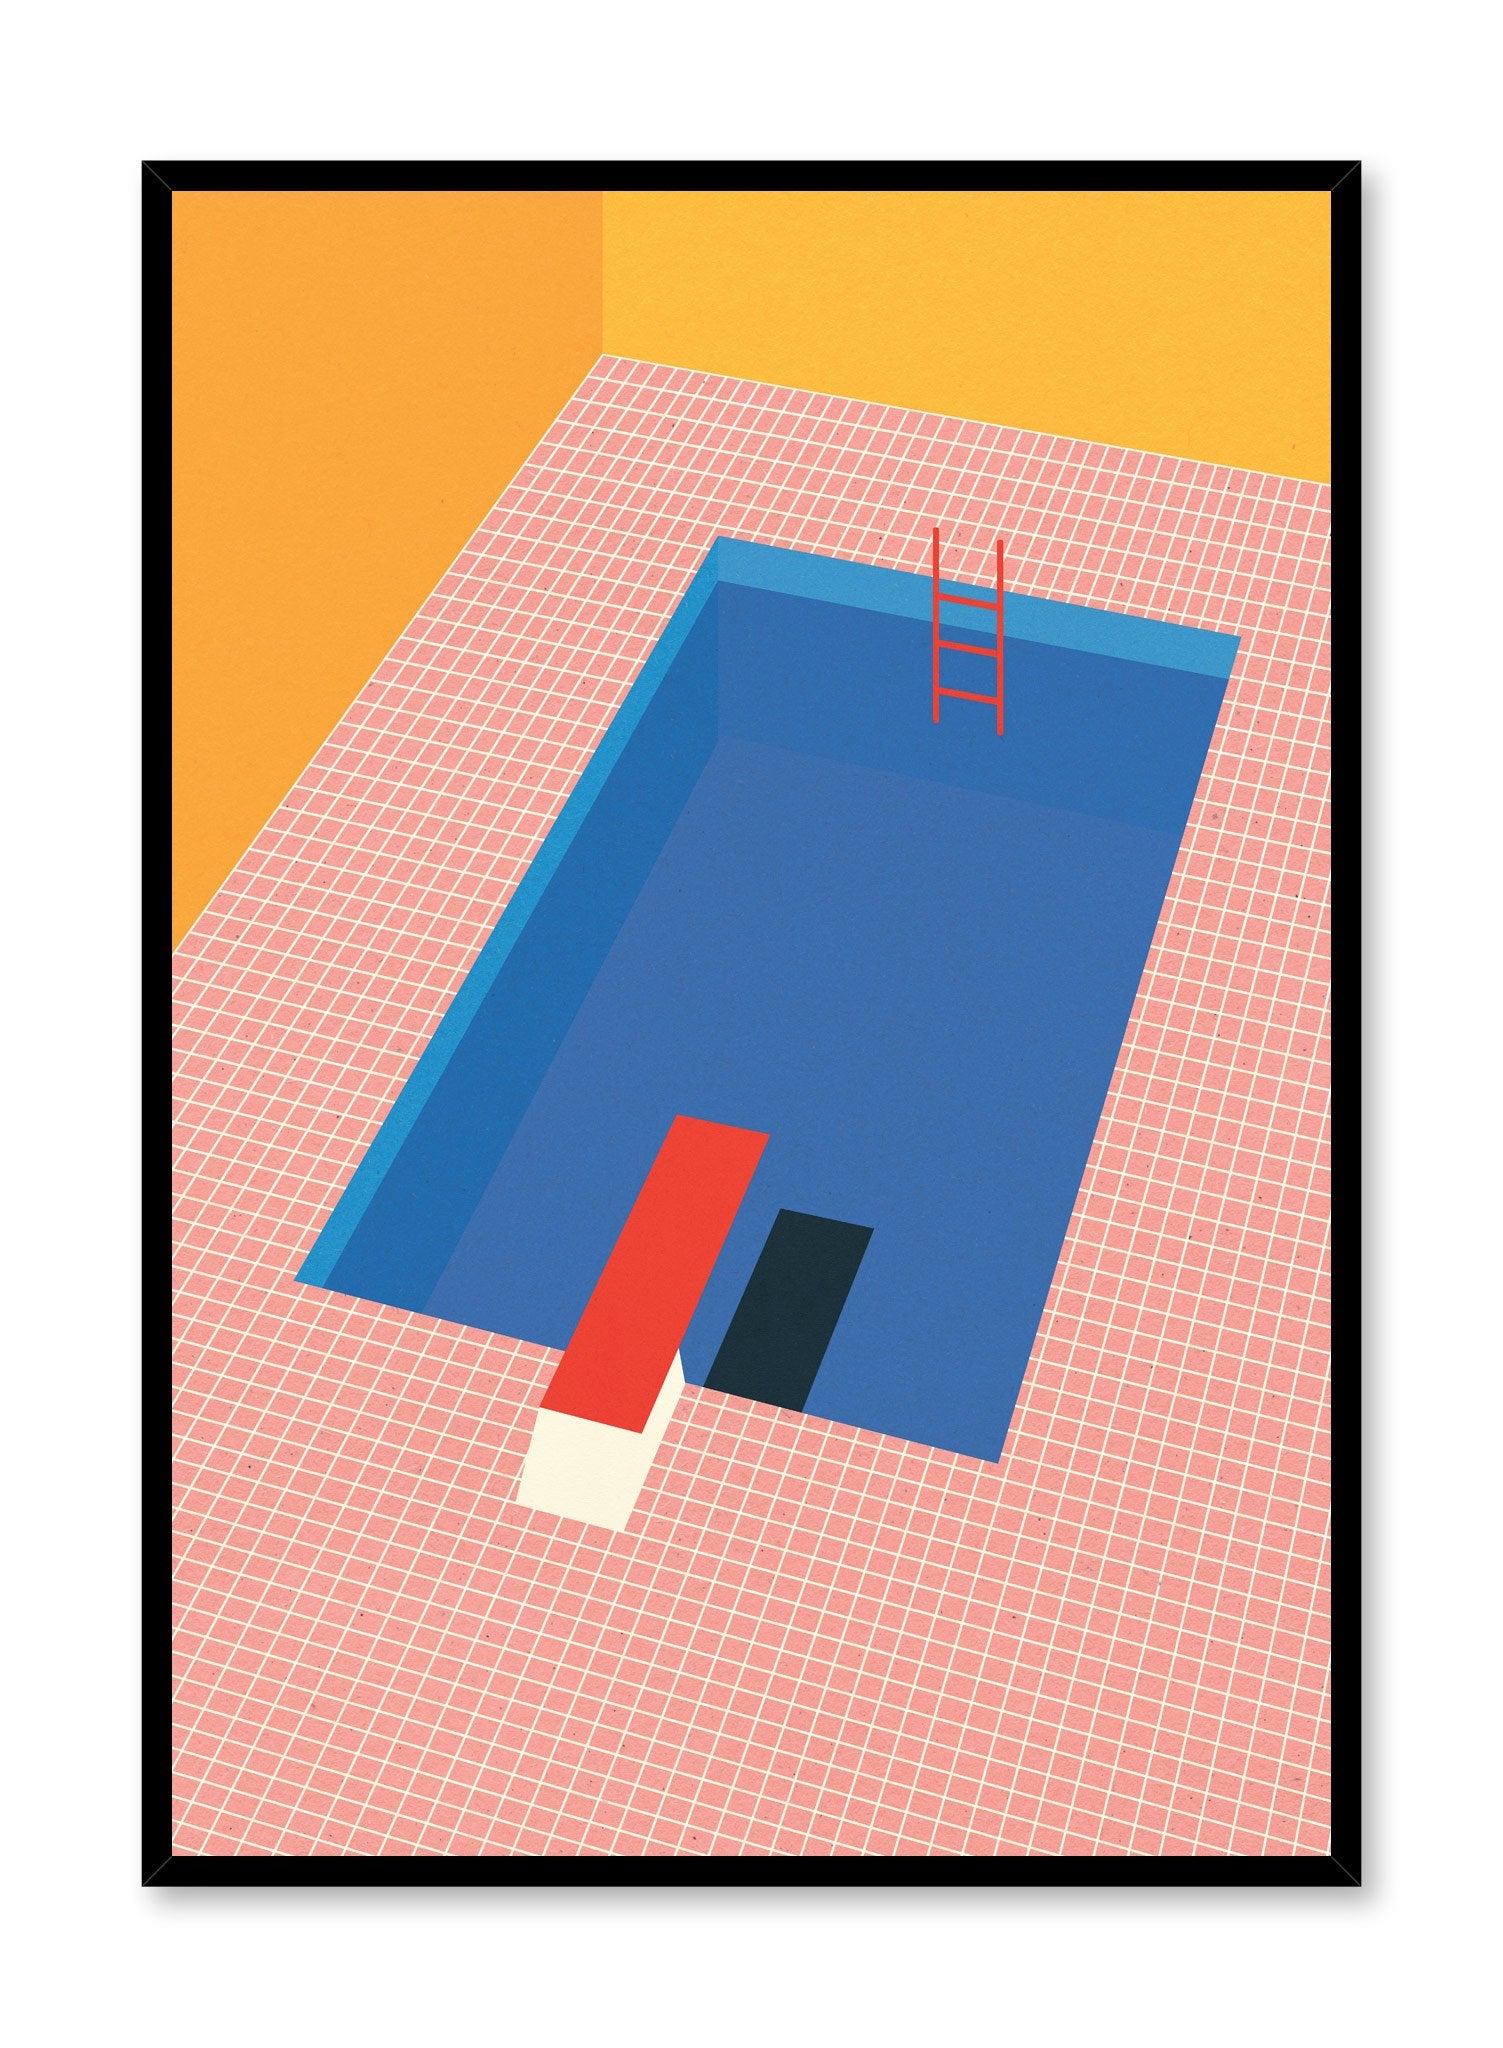 Minimalist pop art paper illustration by German artist Rosi Feist with pool and diving board